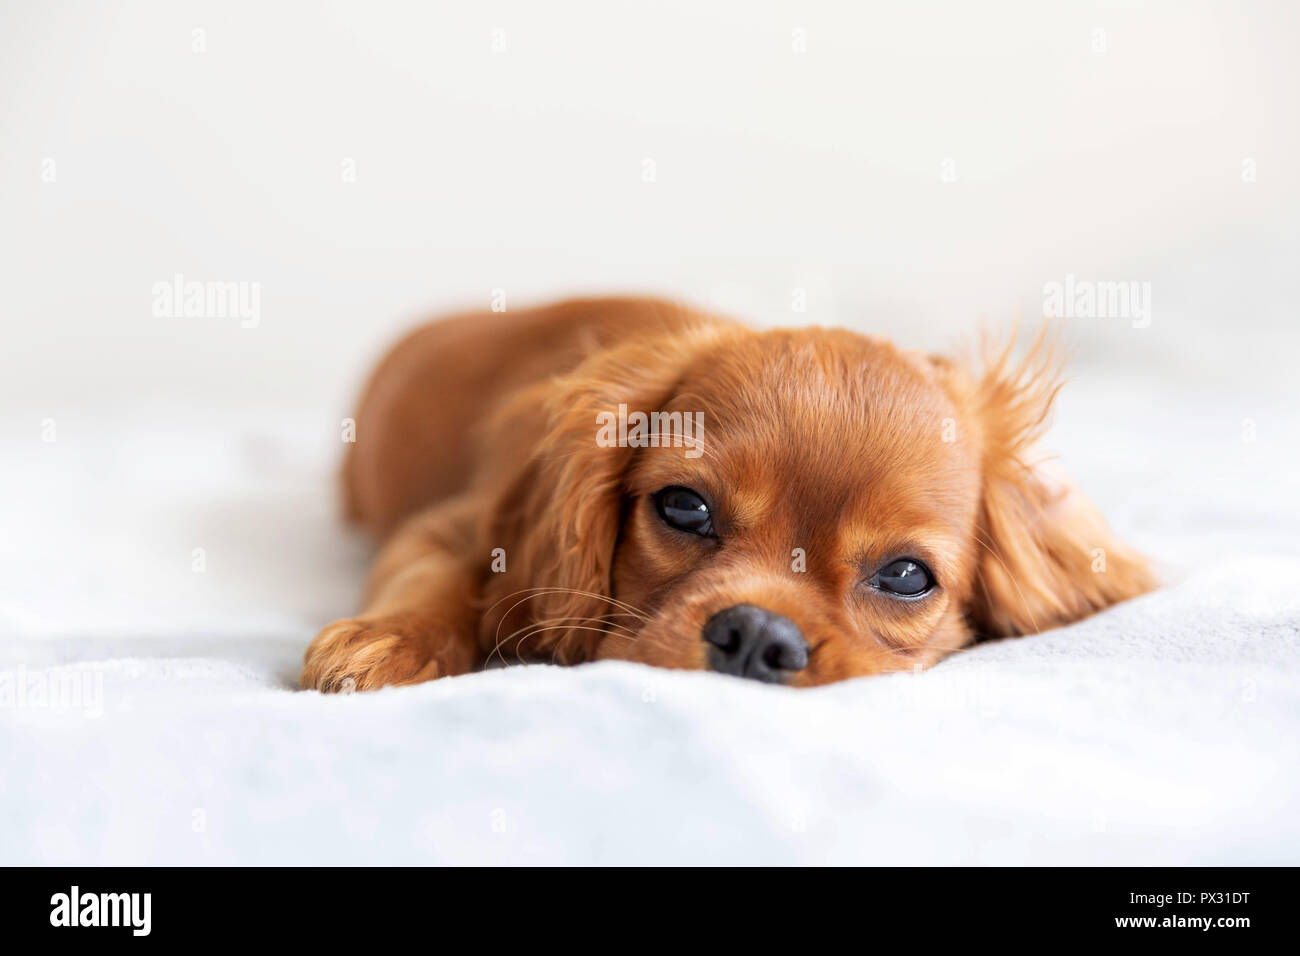 Cute puppy relaxing on the soft blanket Stock Photo